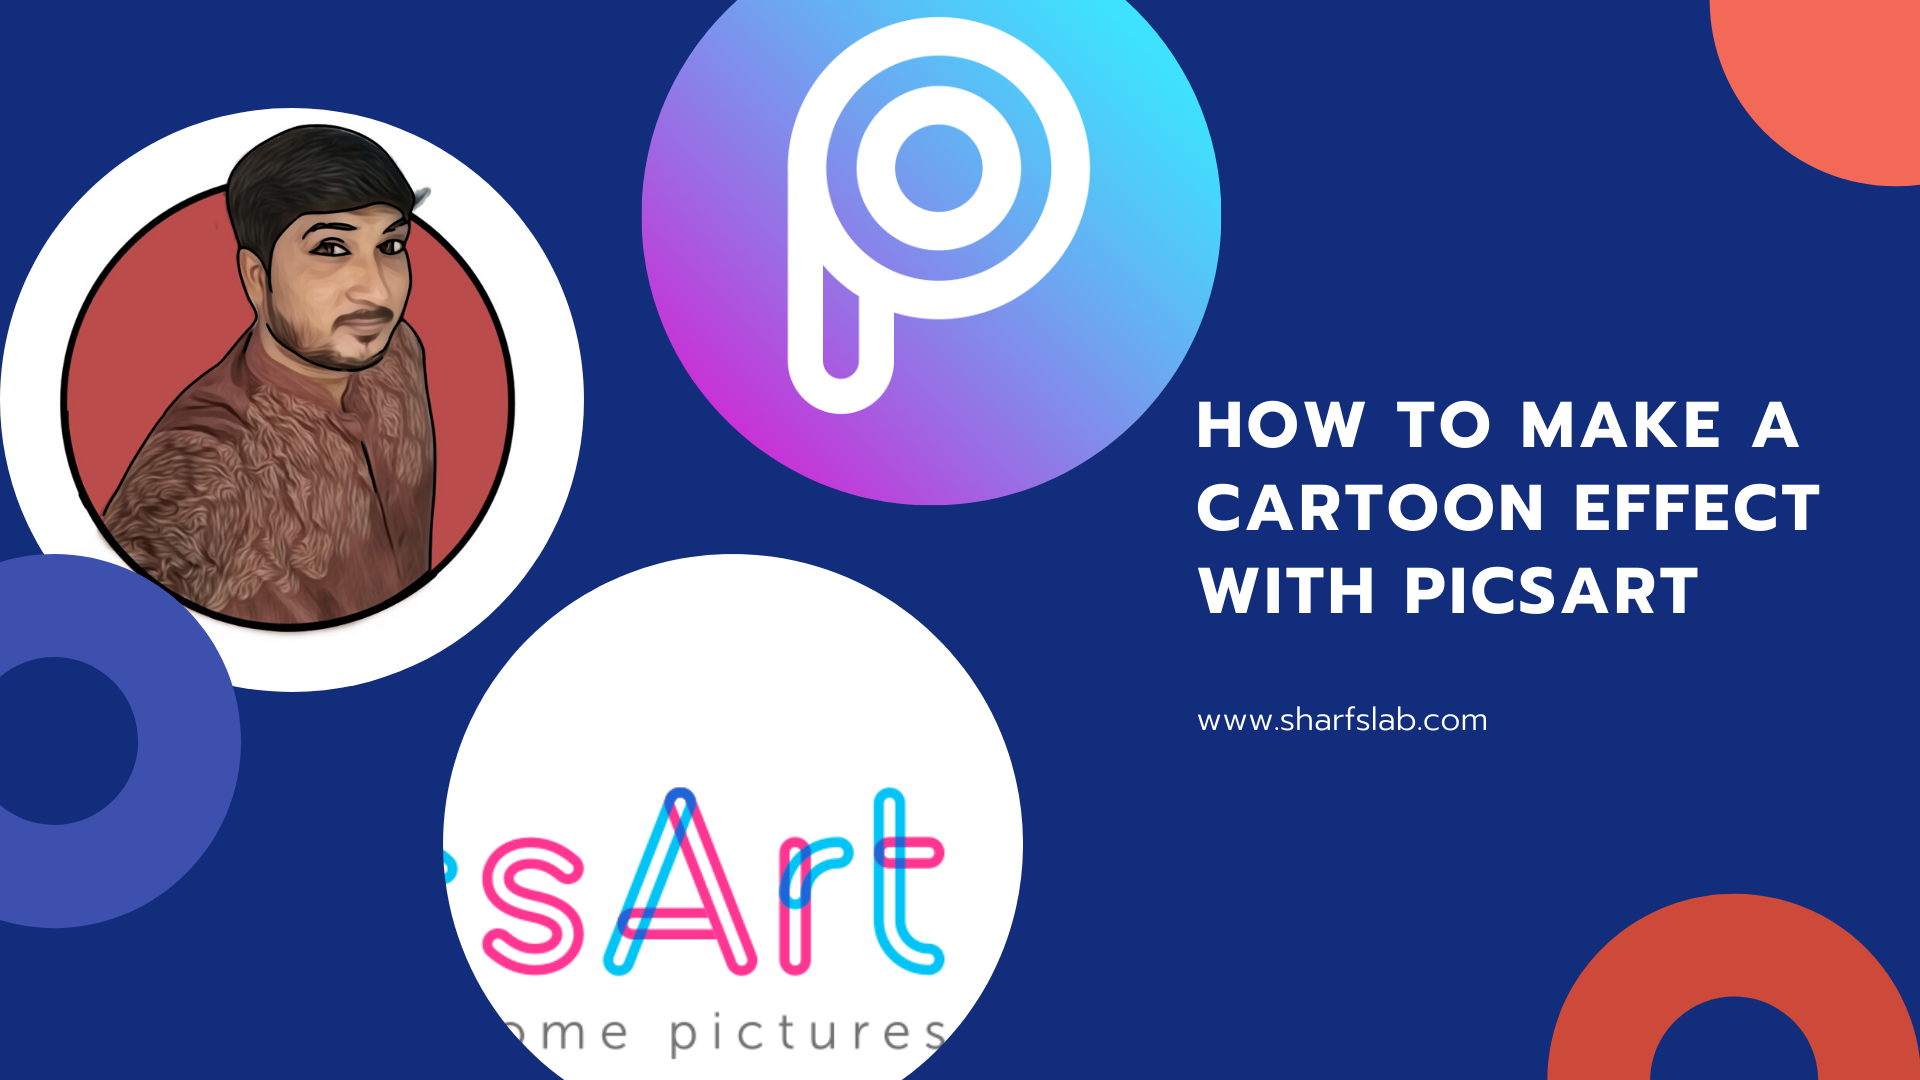 How to Make a Cartoon Effect with PicsArt